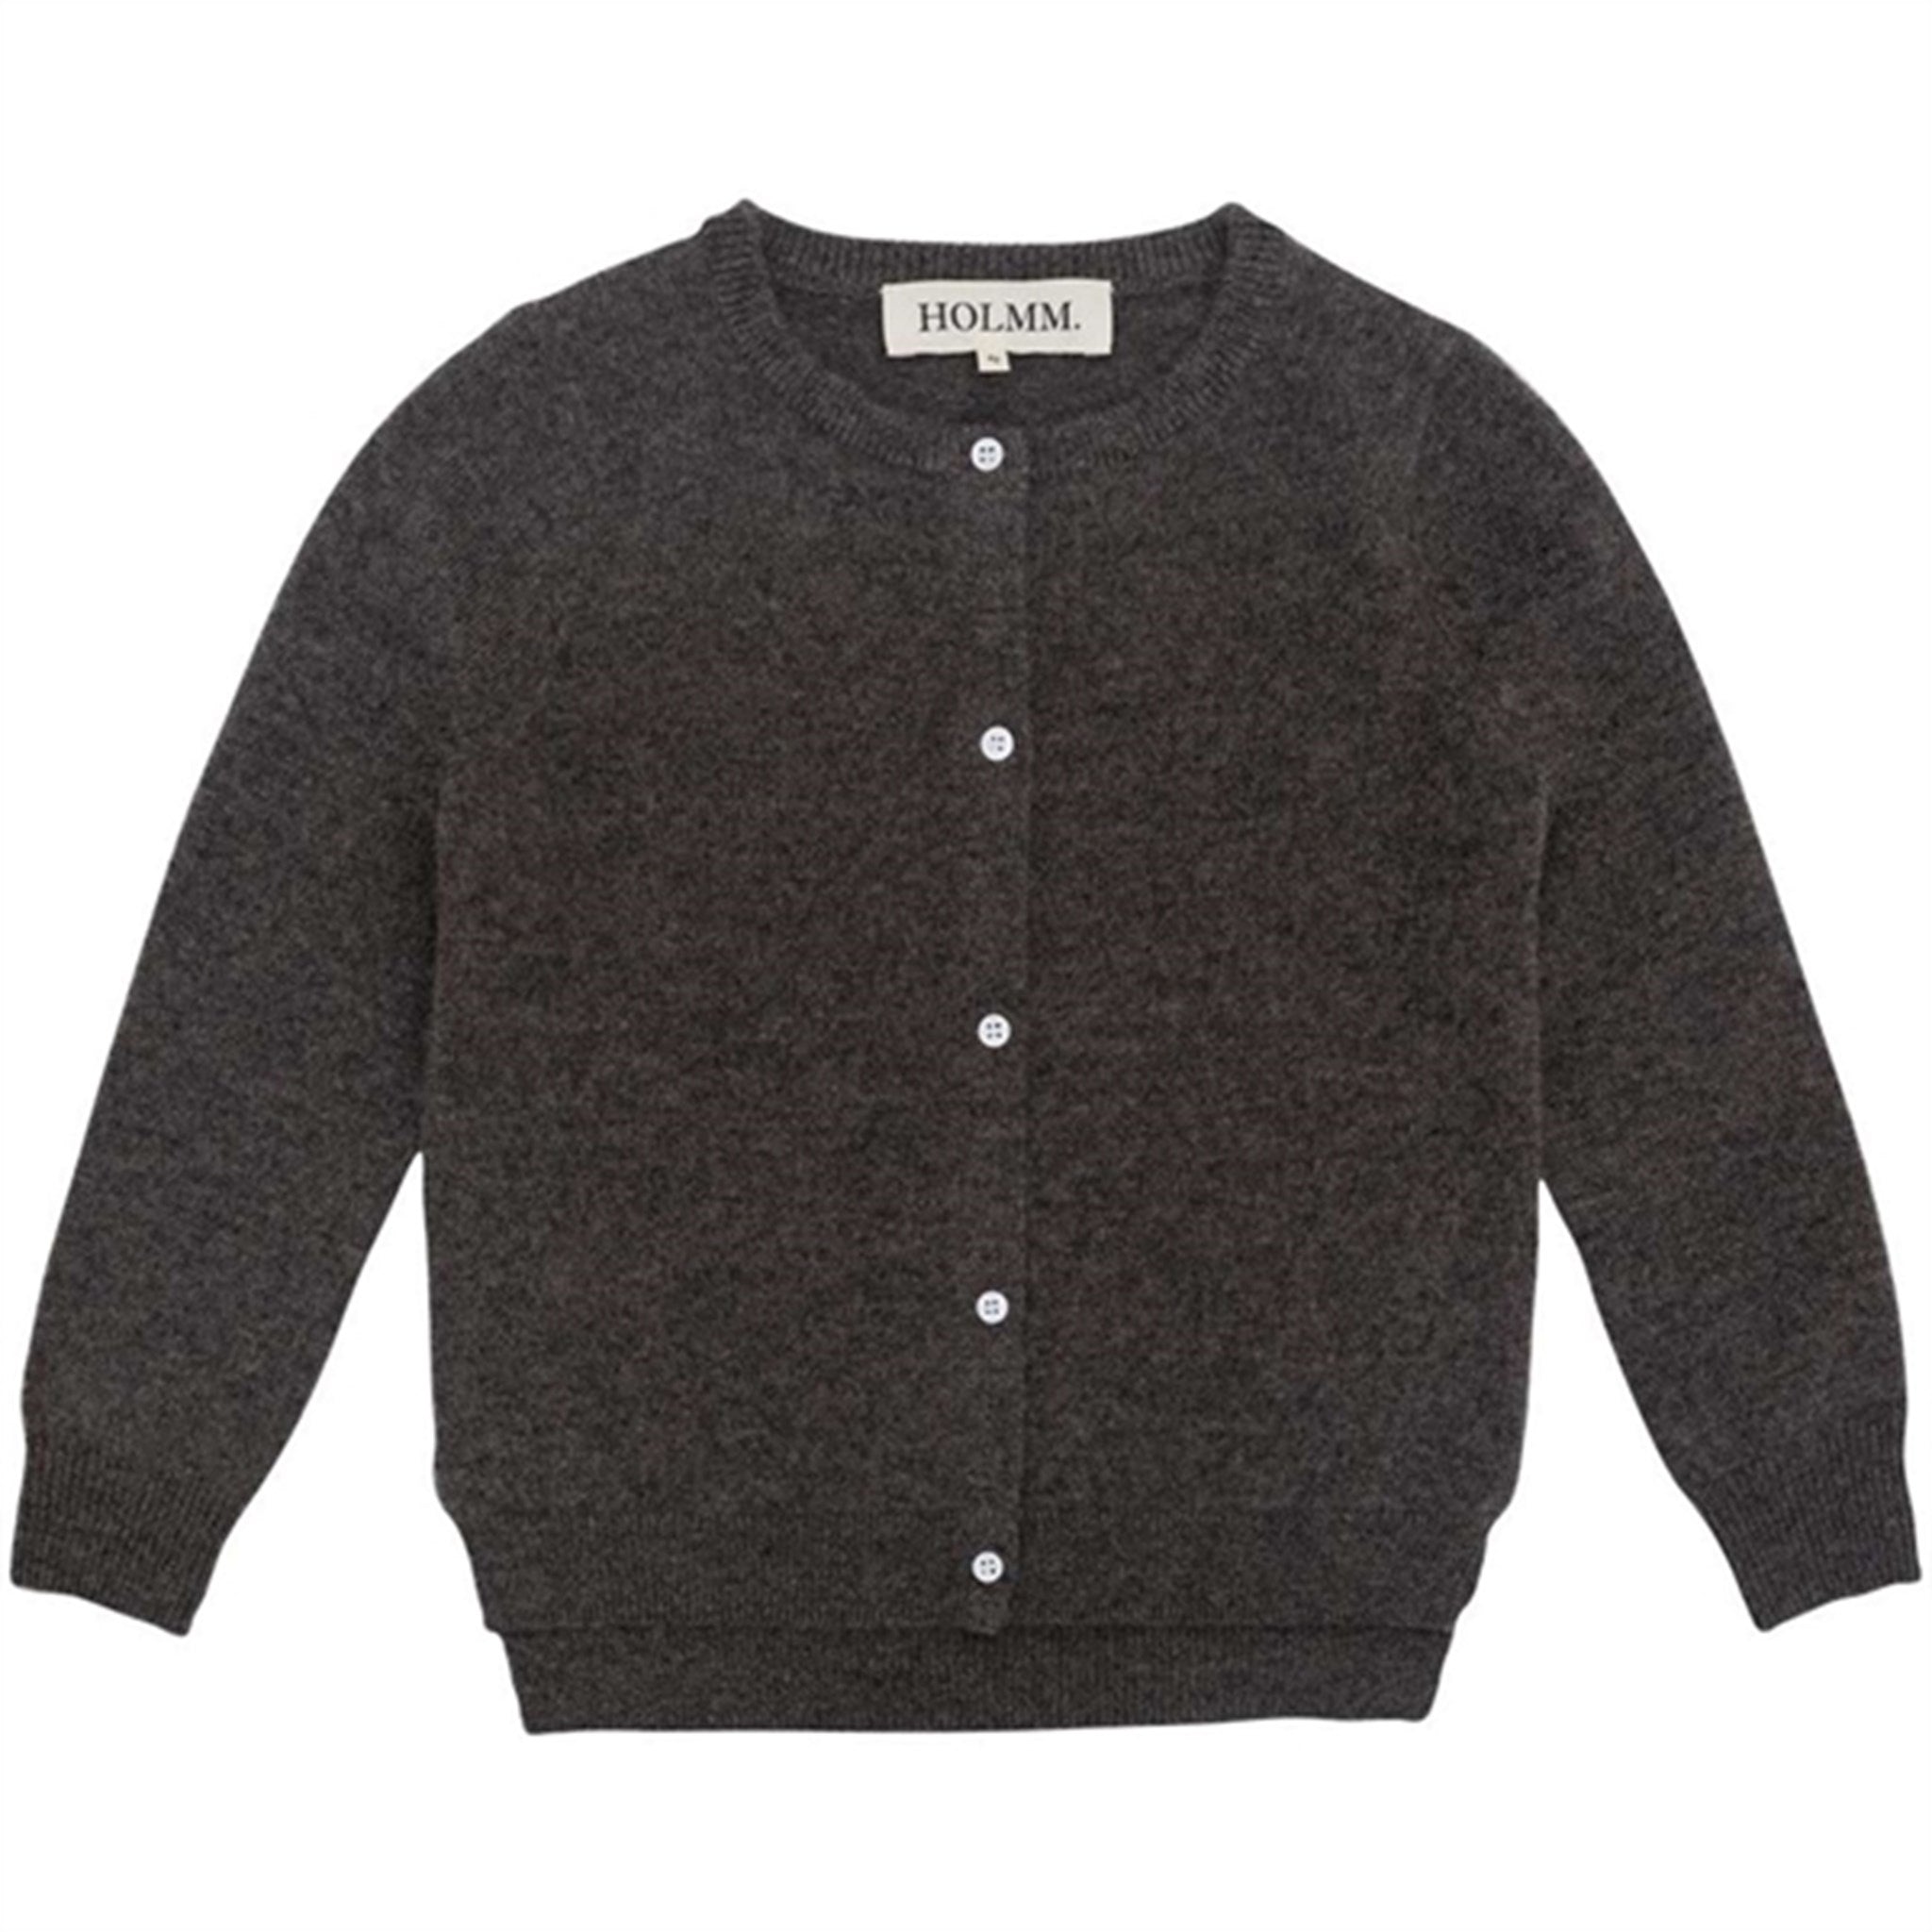 HOLMM Otter Molly Cashmere Knit Cardigan